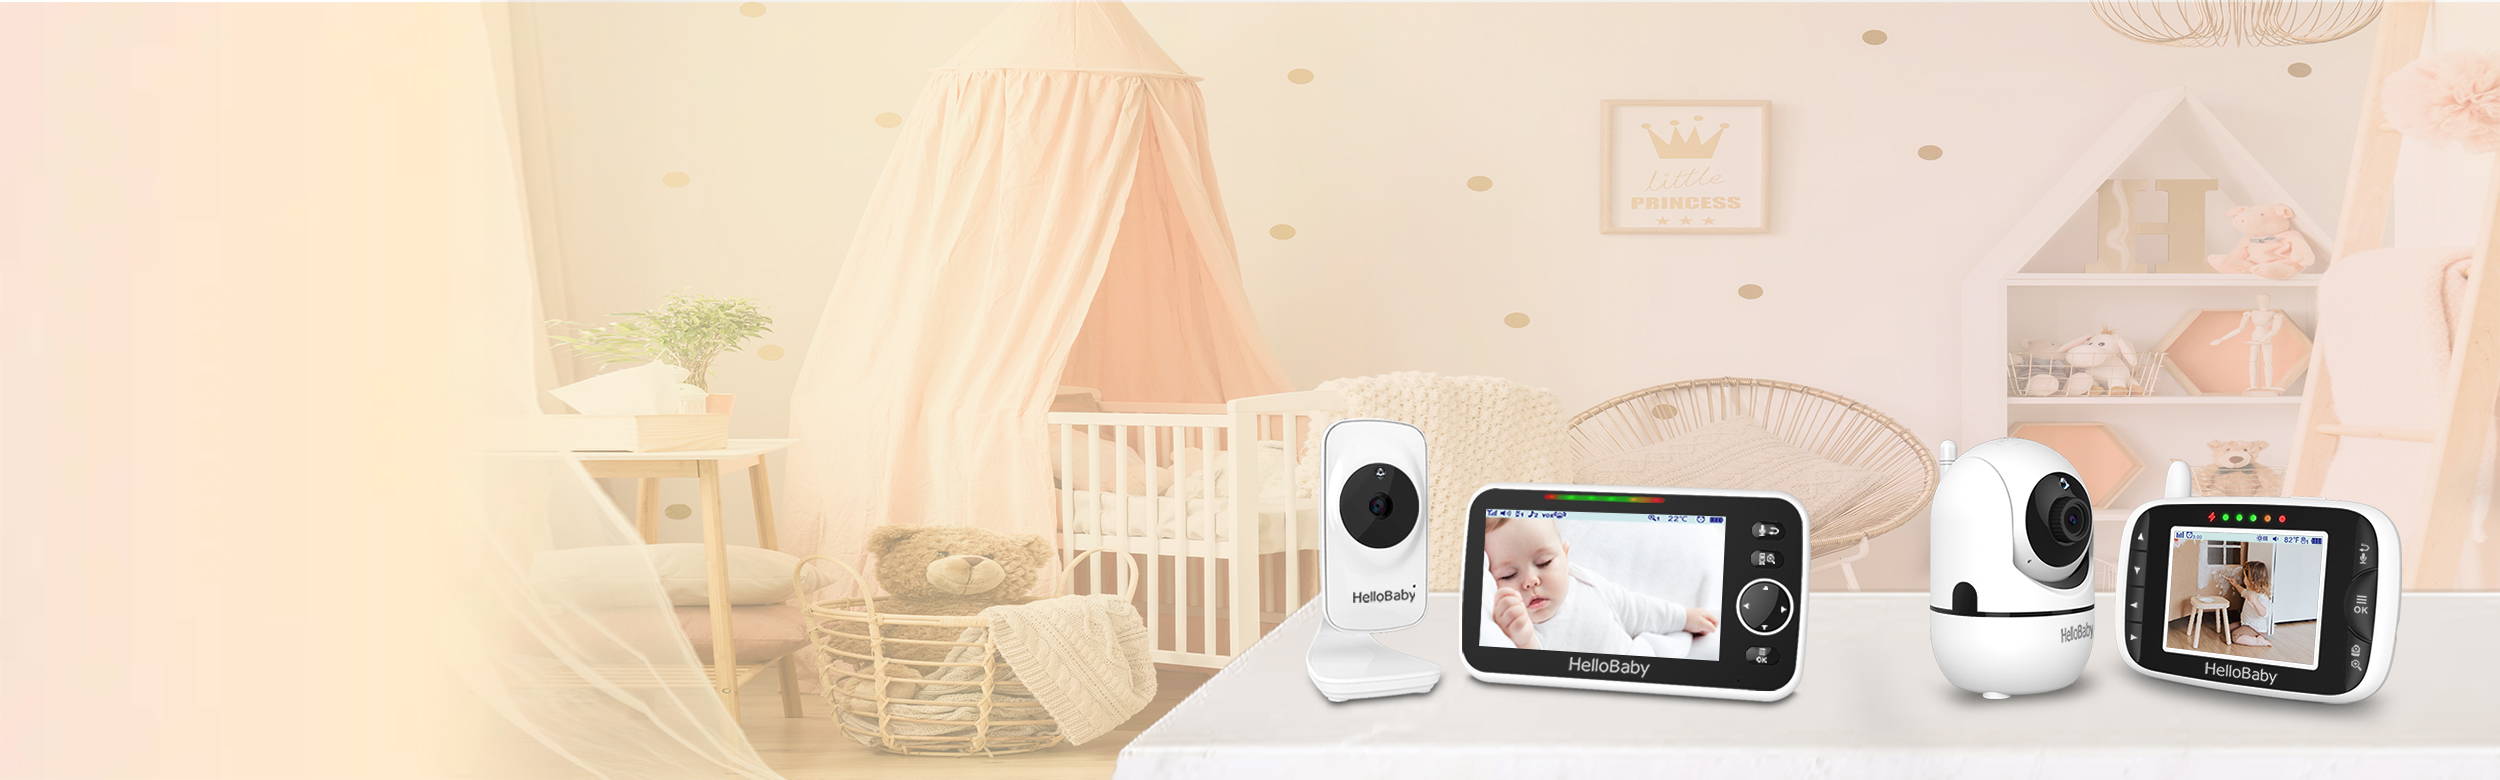 HelloBaby baby monitor offers 24-hour customer service support.